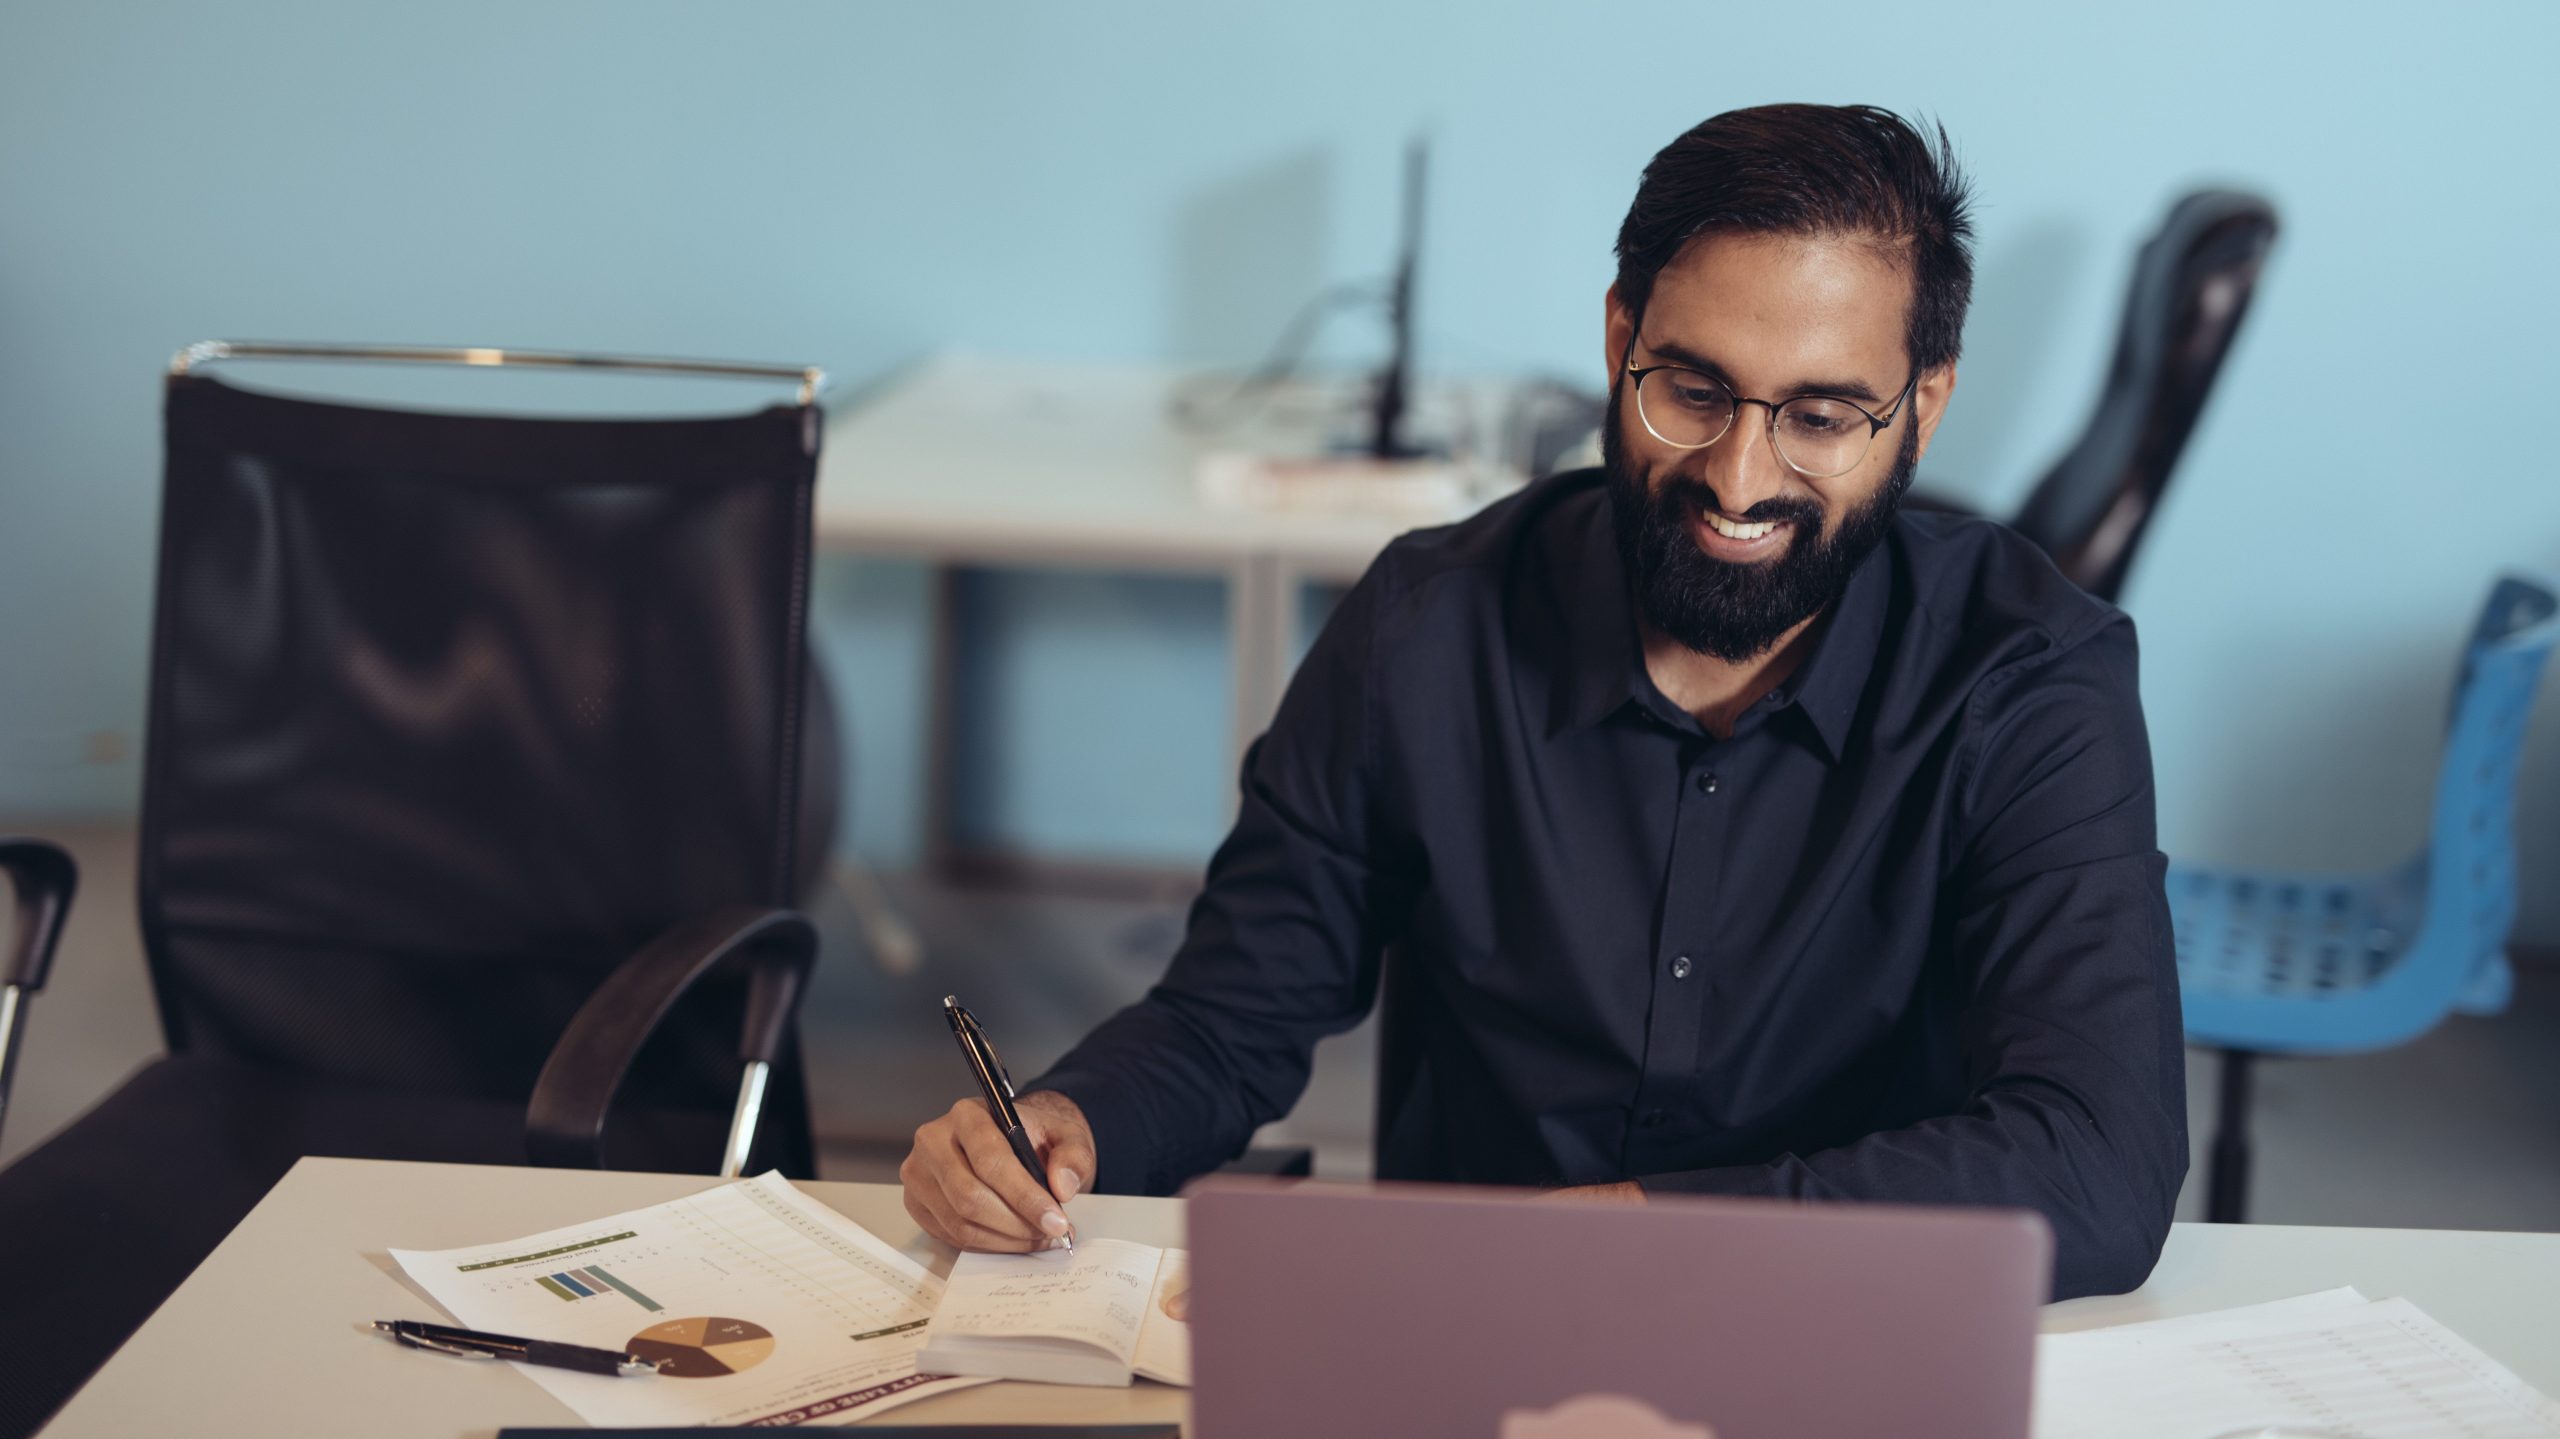 South Asian man in dark button up shirt with beard, sit smiling and at desk while notetaking and viewing a laptop screen